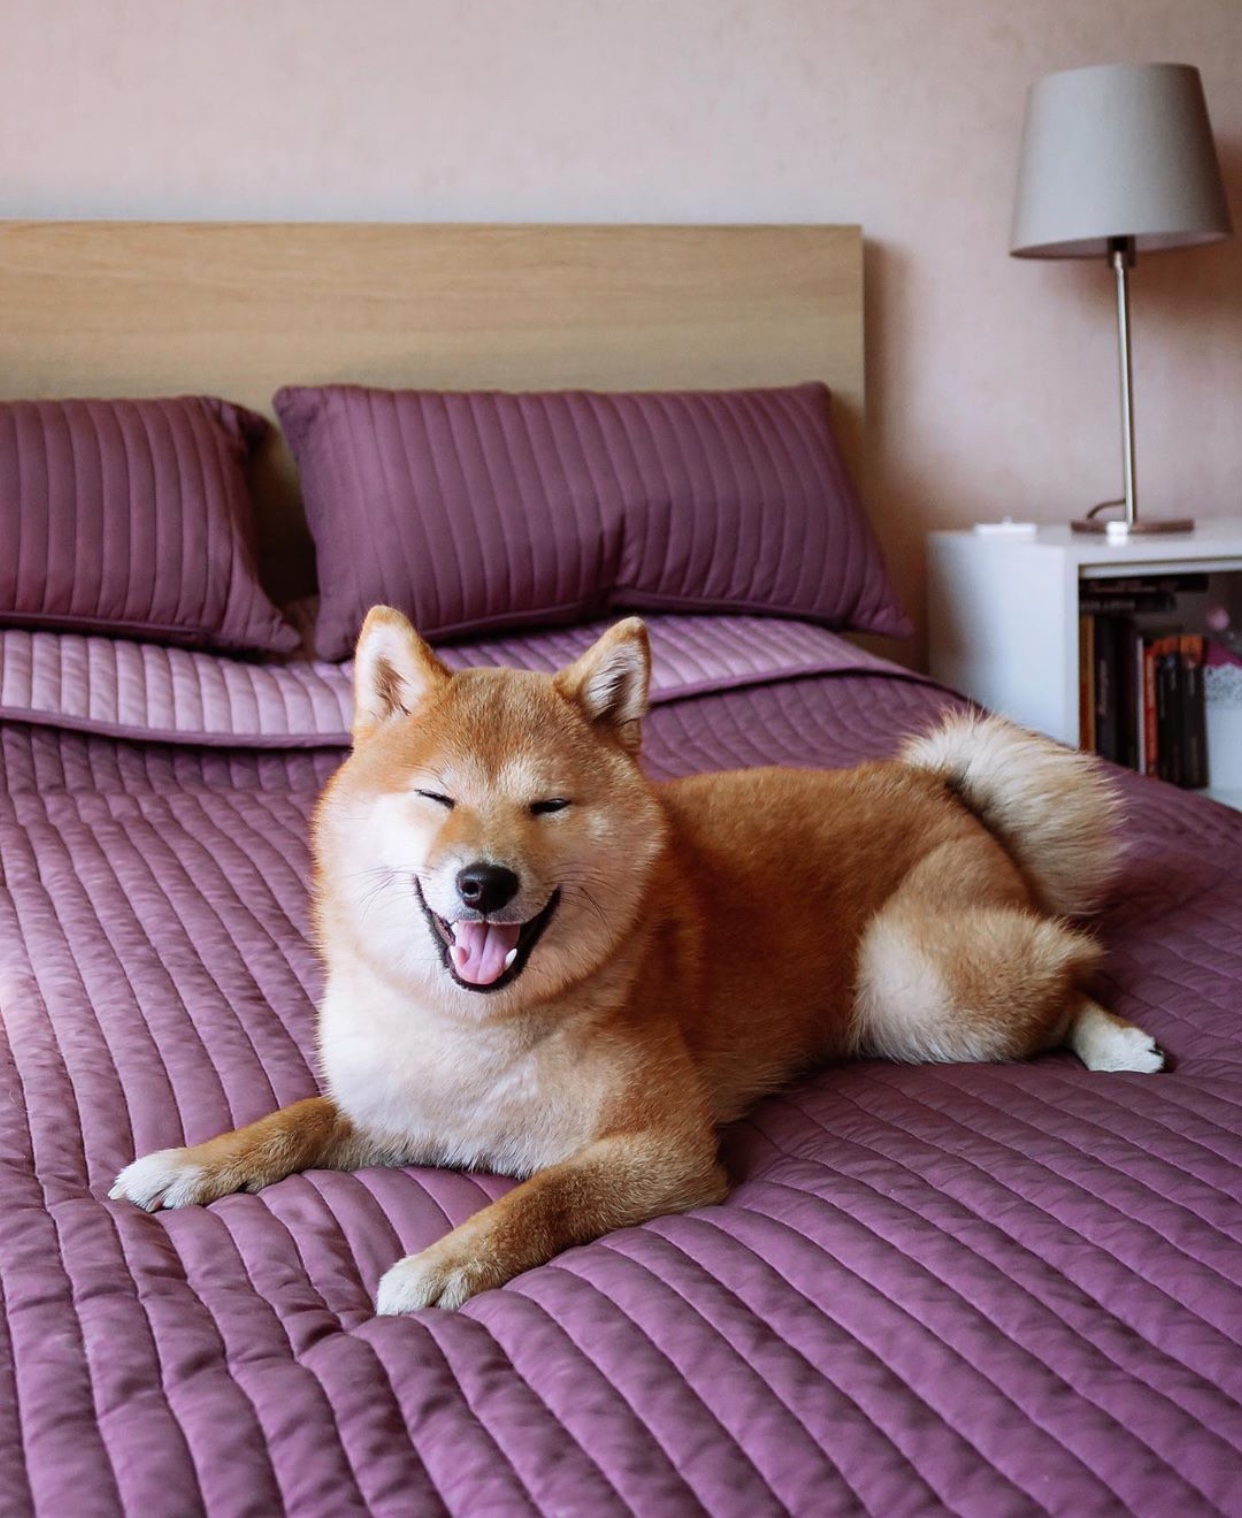 Shiba Inu lying on top of the purple bed while smiling